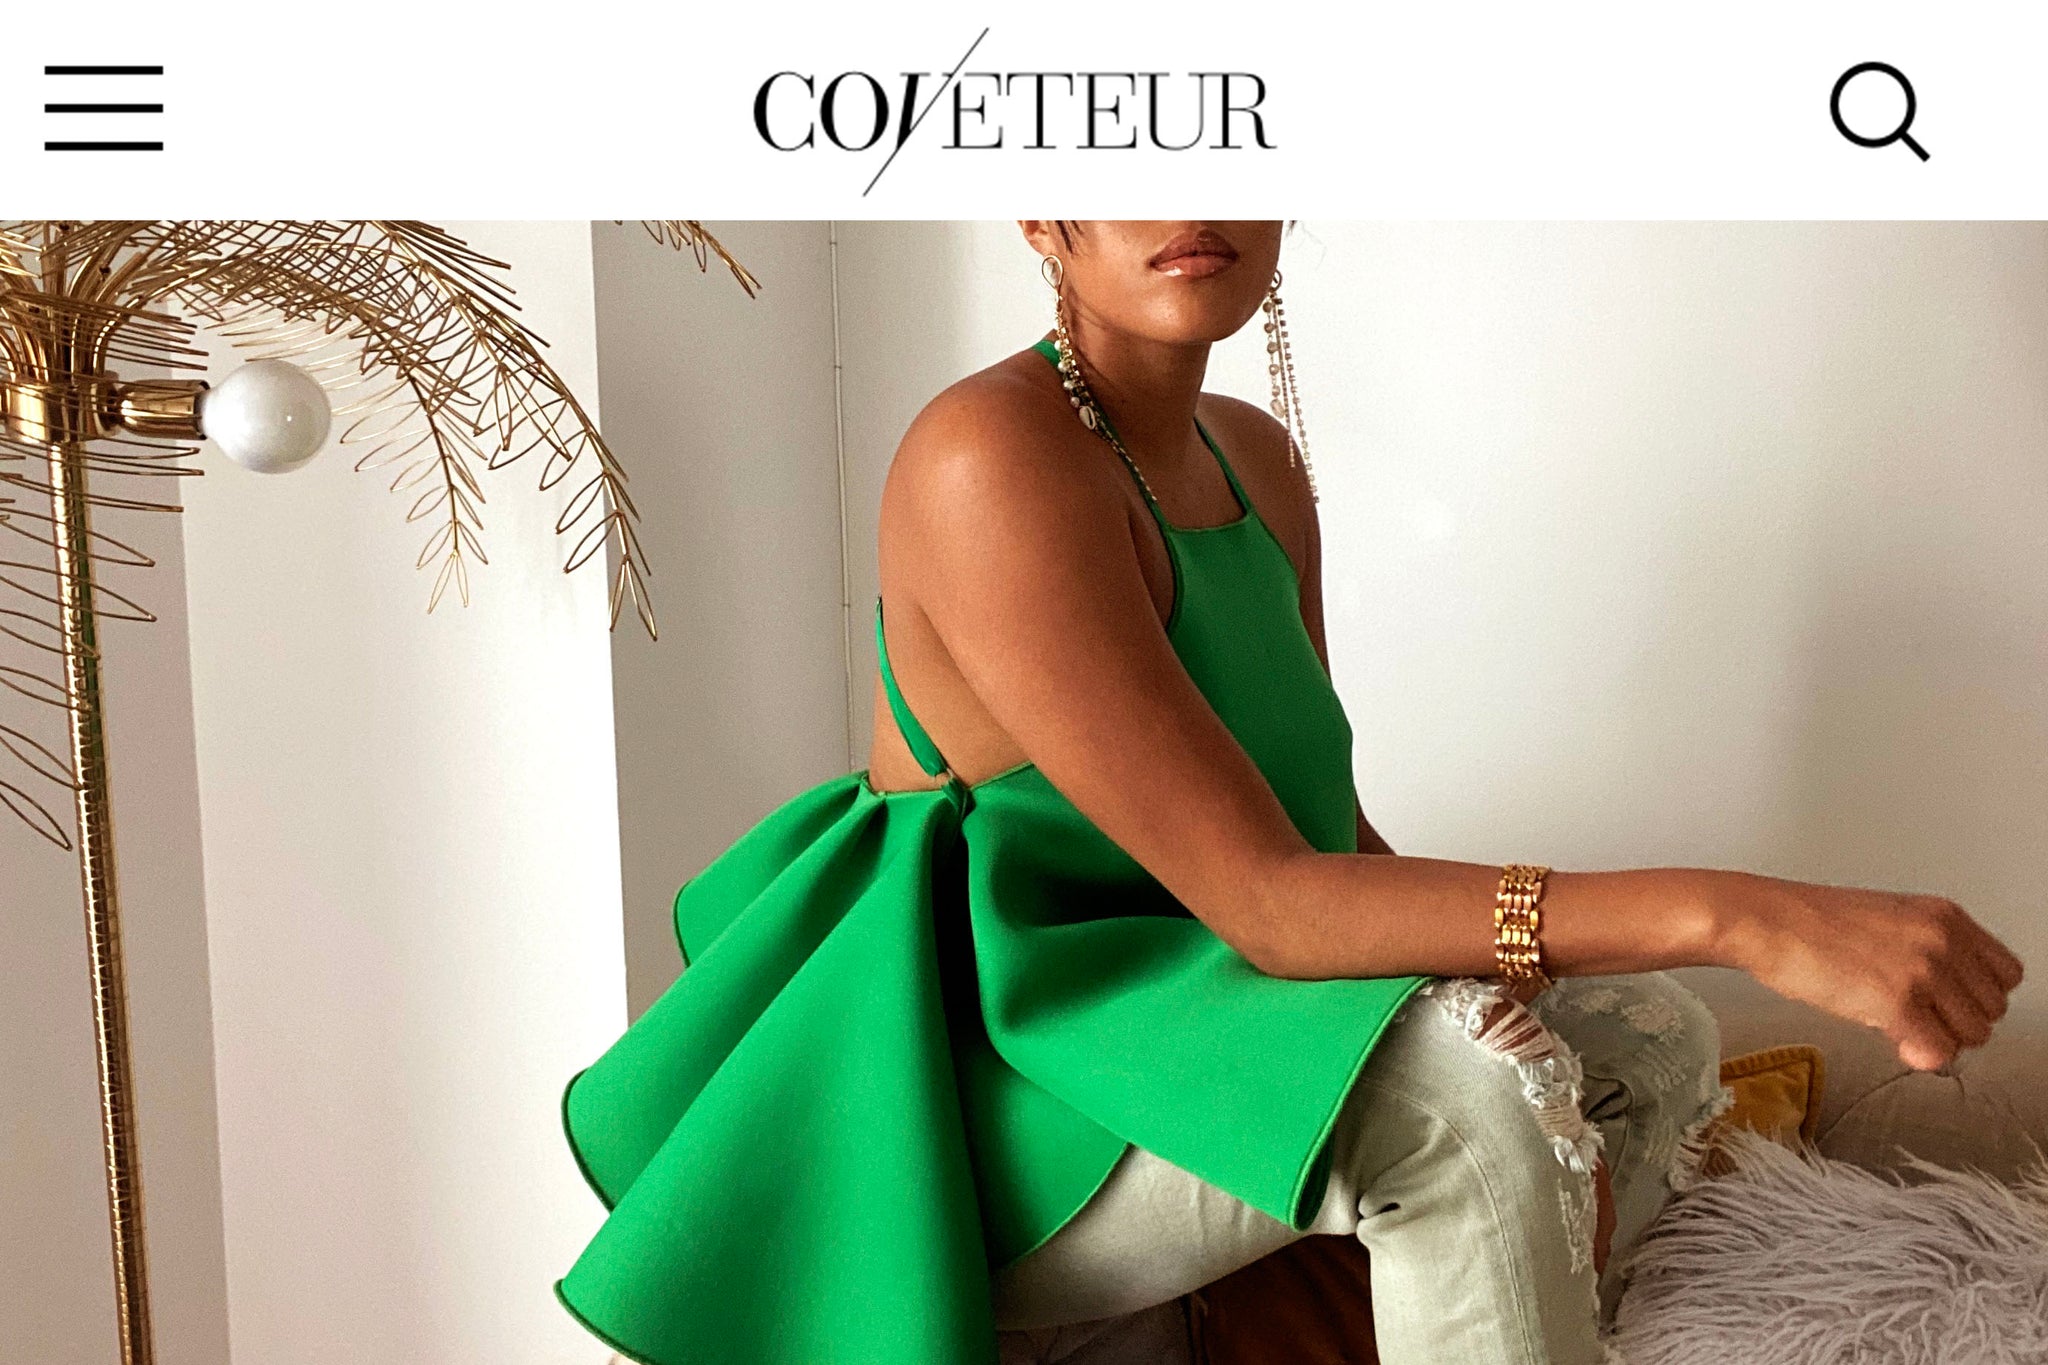 Black Owned: The Muehleder Catherine Top In The Coveteur